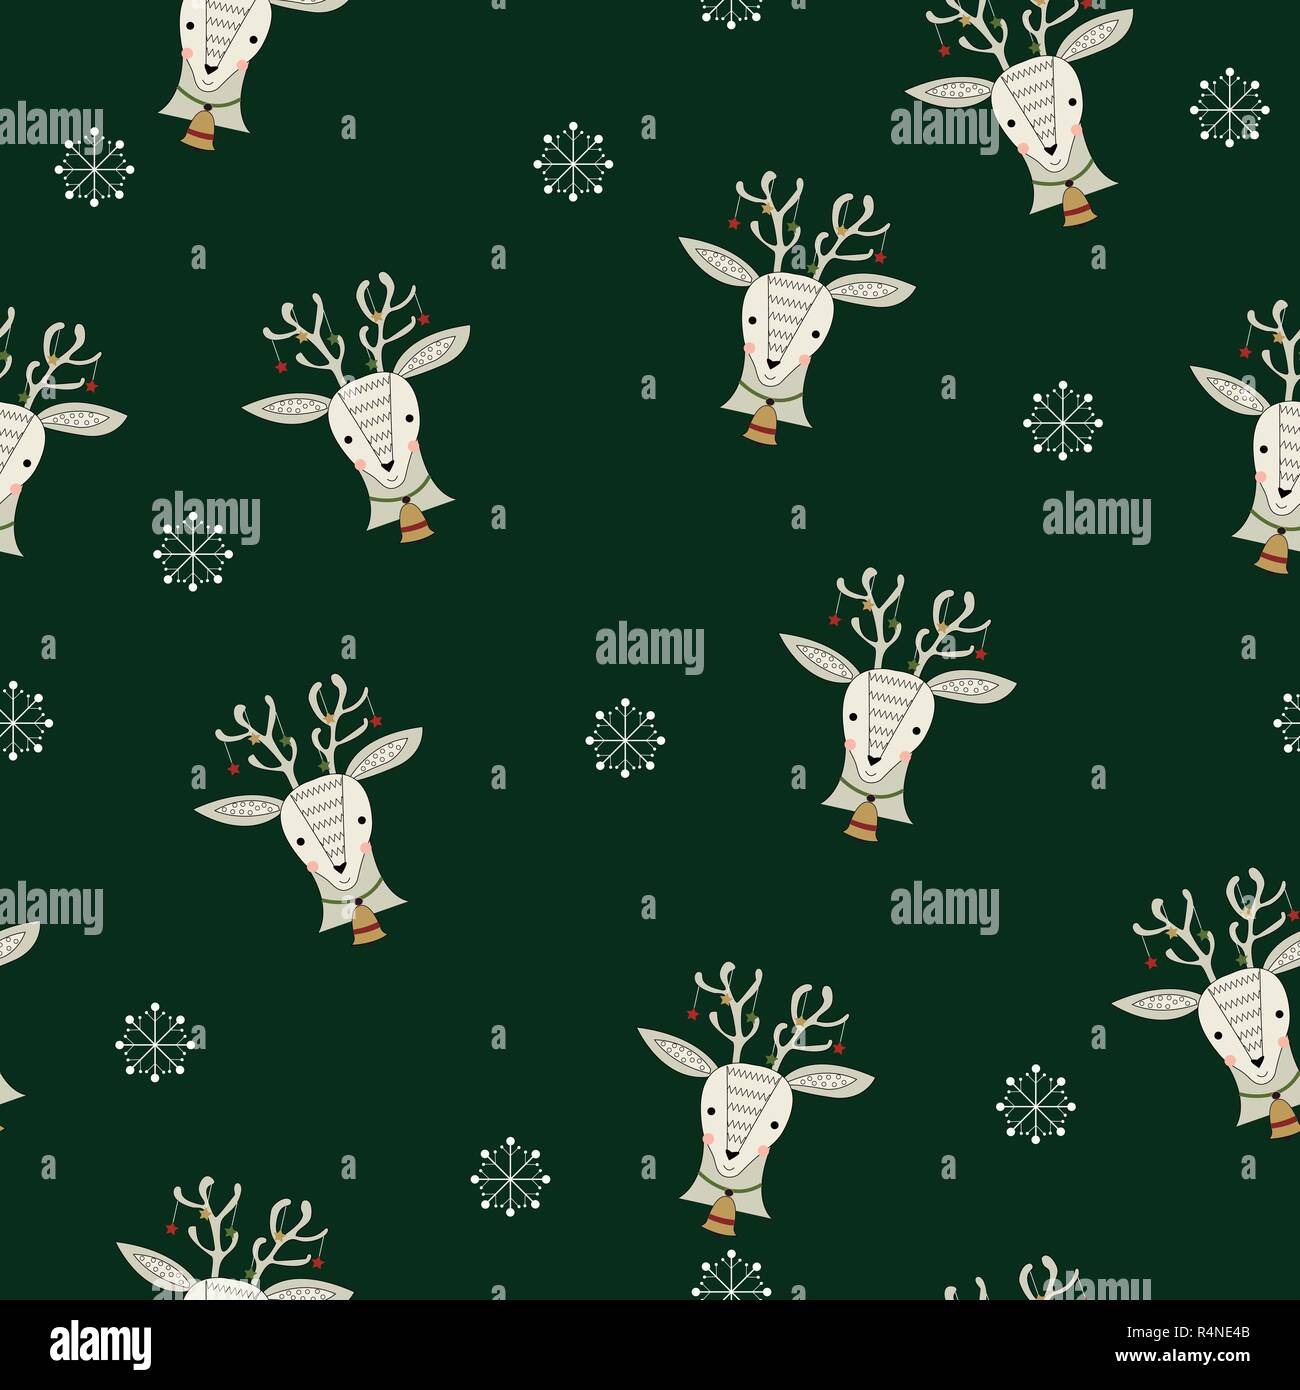 Download Festive Seamless Pattern With Reindeer And Snowflakes On The Dark Green Background Christmas Design For Cards Paper Textile Vector Illustration Stock Vector Image Art Alamy